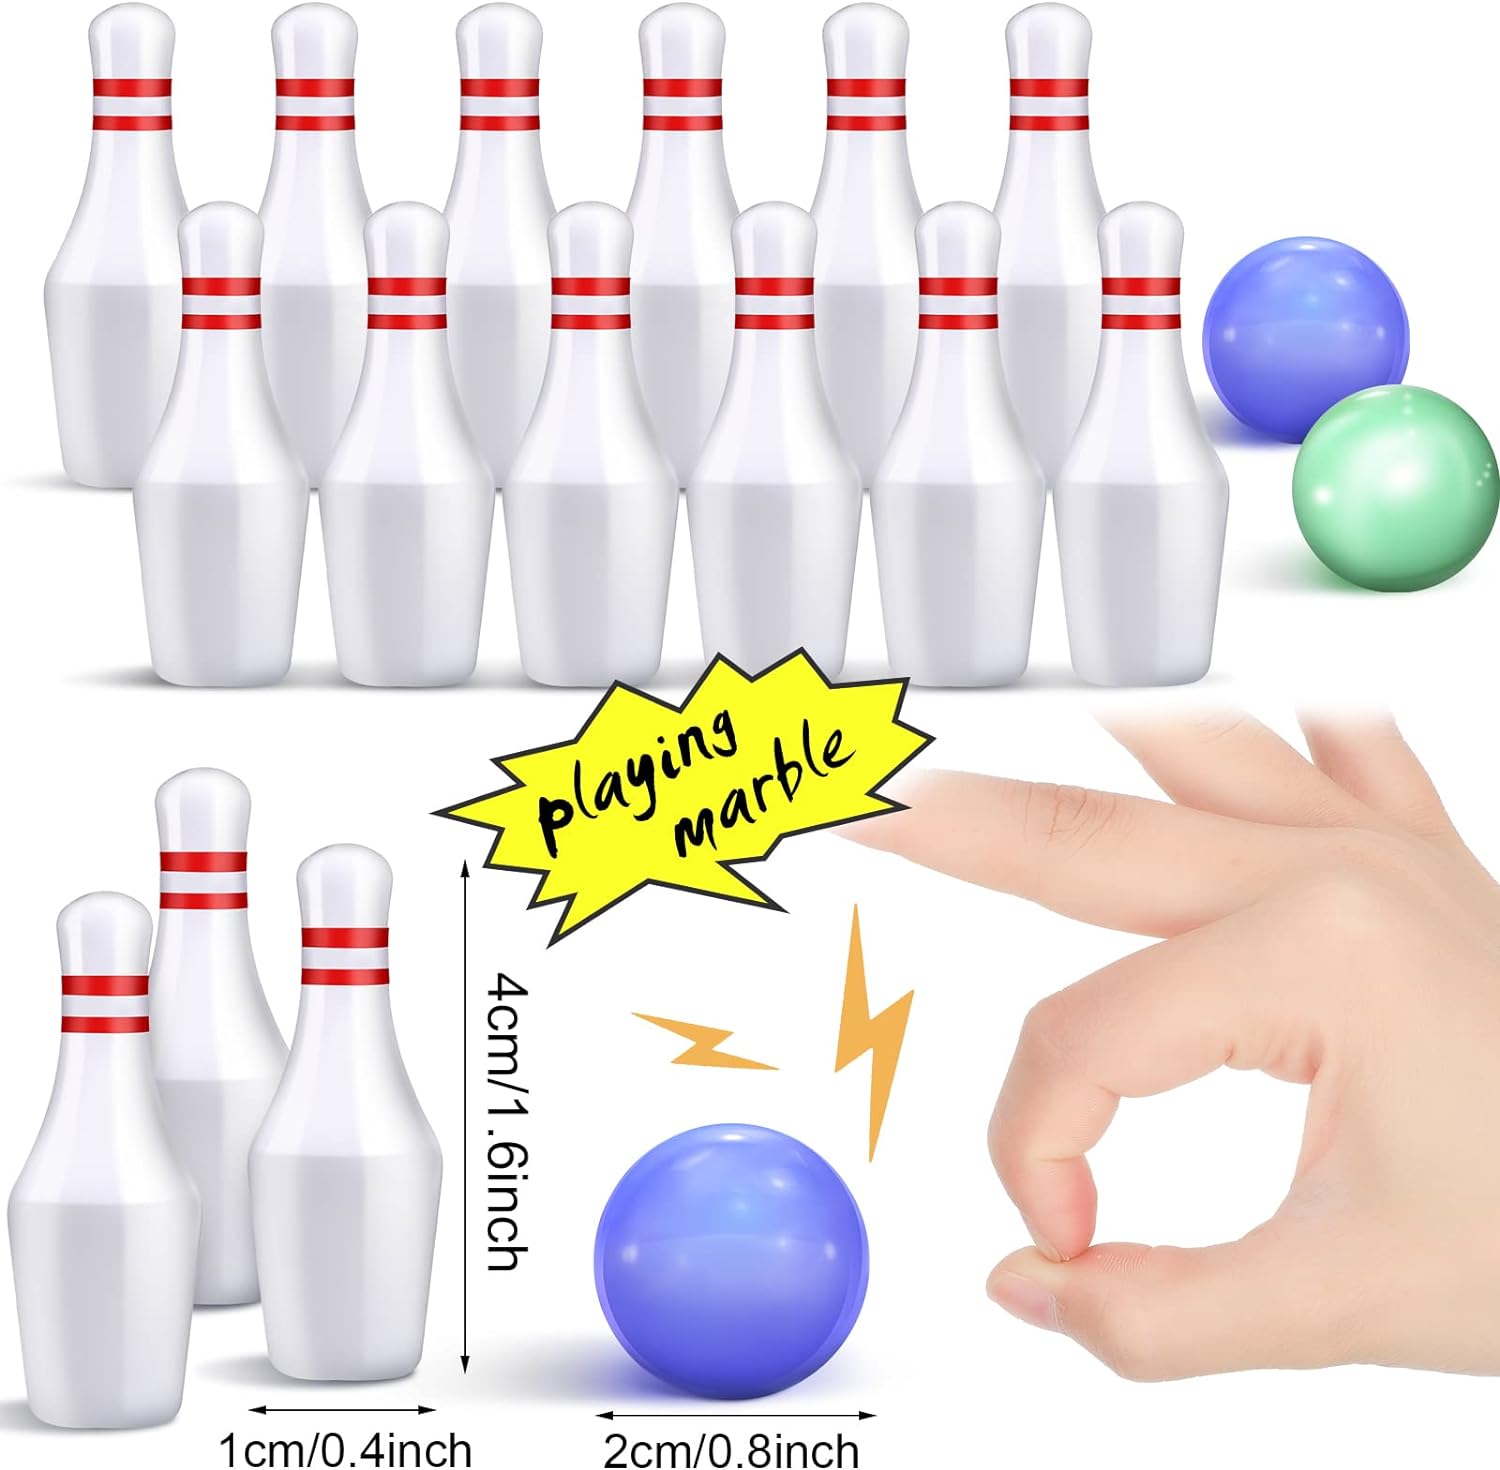 Lewtemi 24 Sets Mini Bowling Pins Game Bulk Table Top Finger Bowling Game Set with Miniature Bowling Pins and Bowling Ball for Christmas Kids Birthday Party Favor Gift